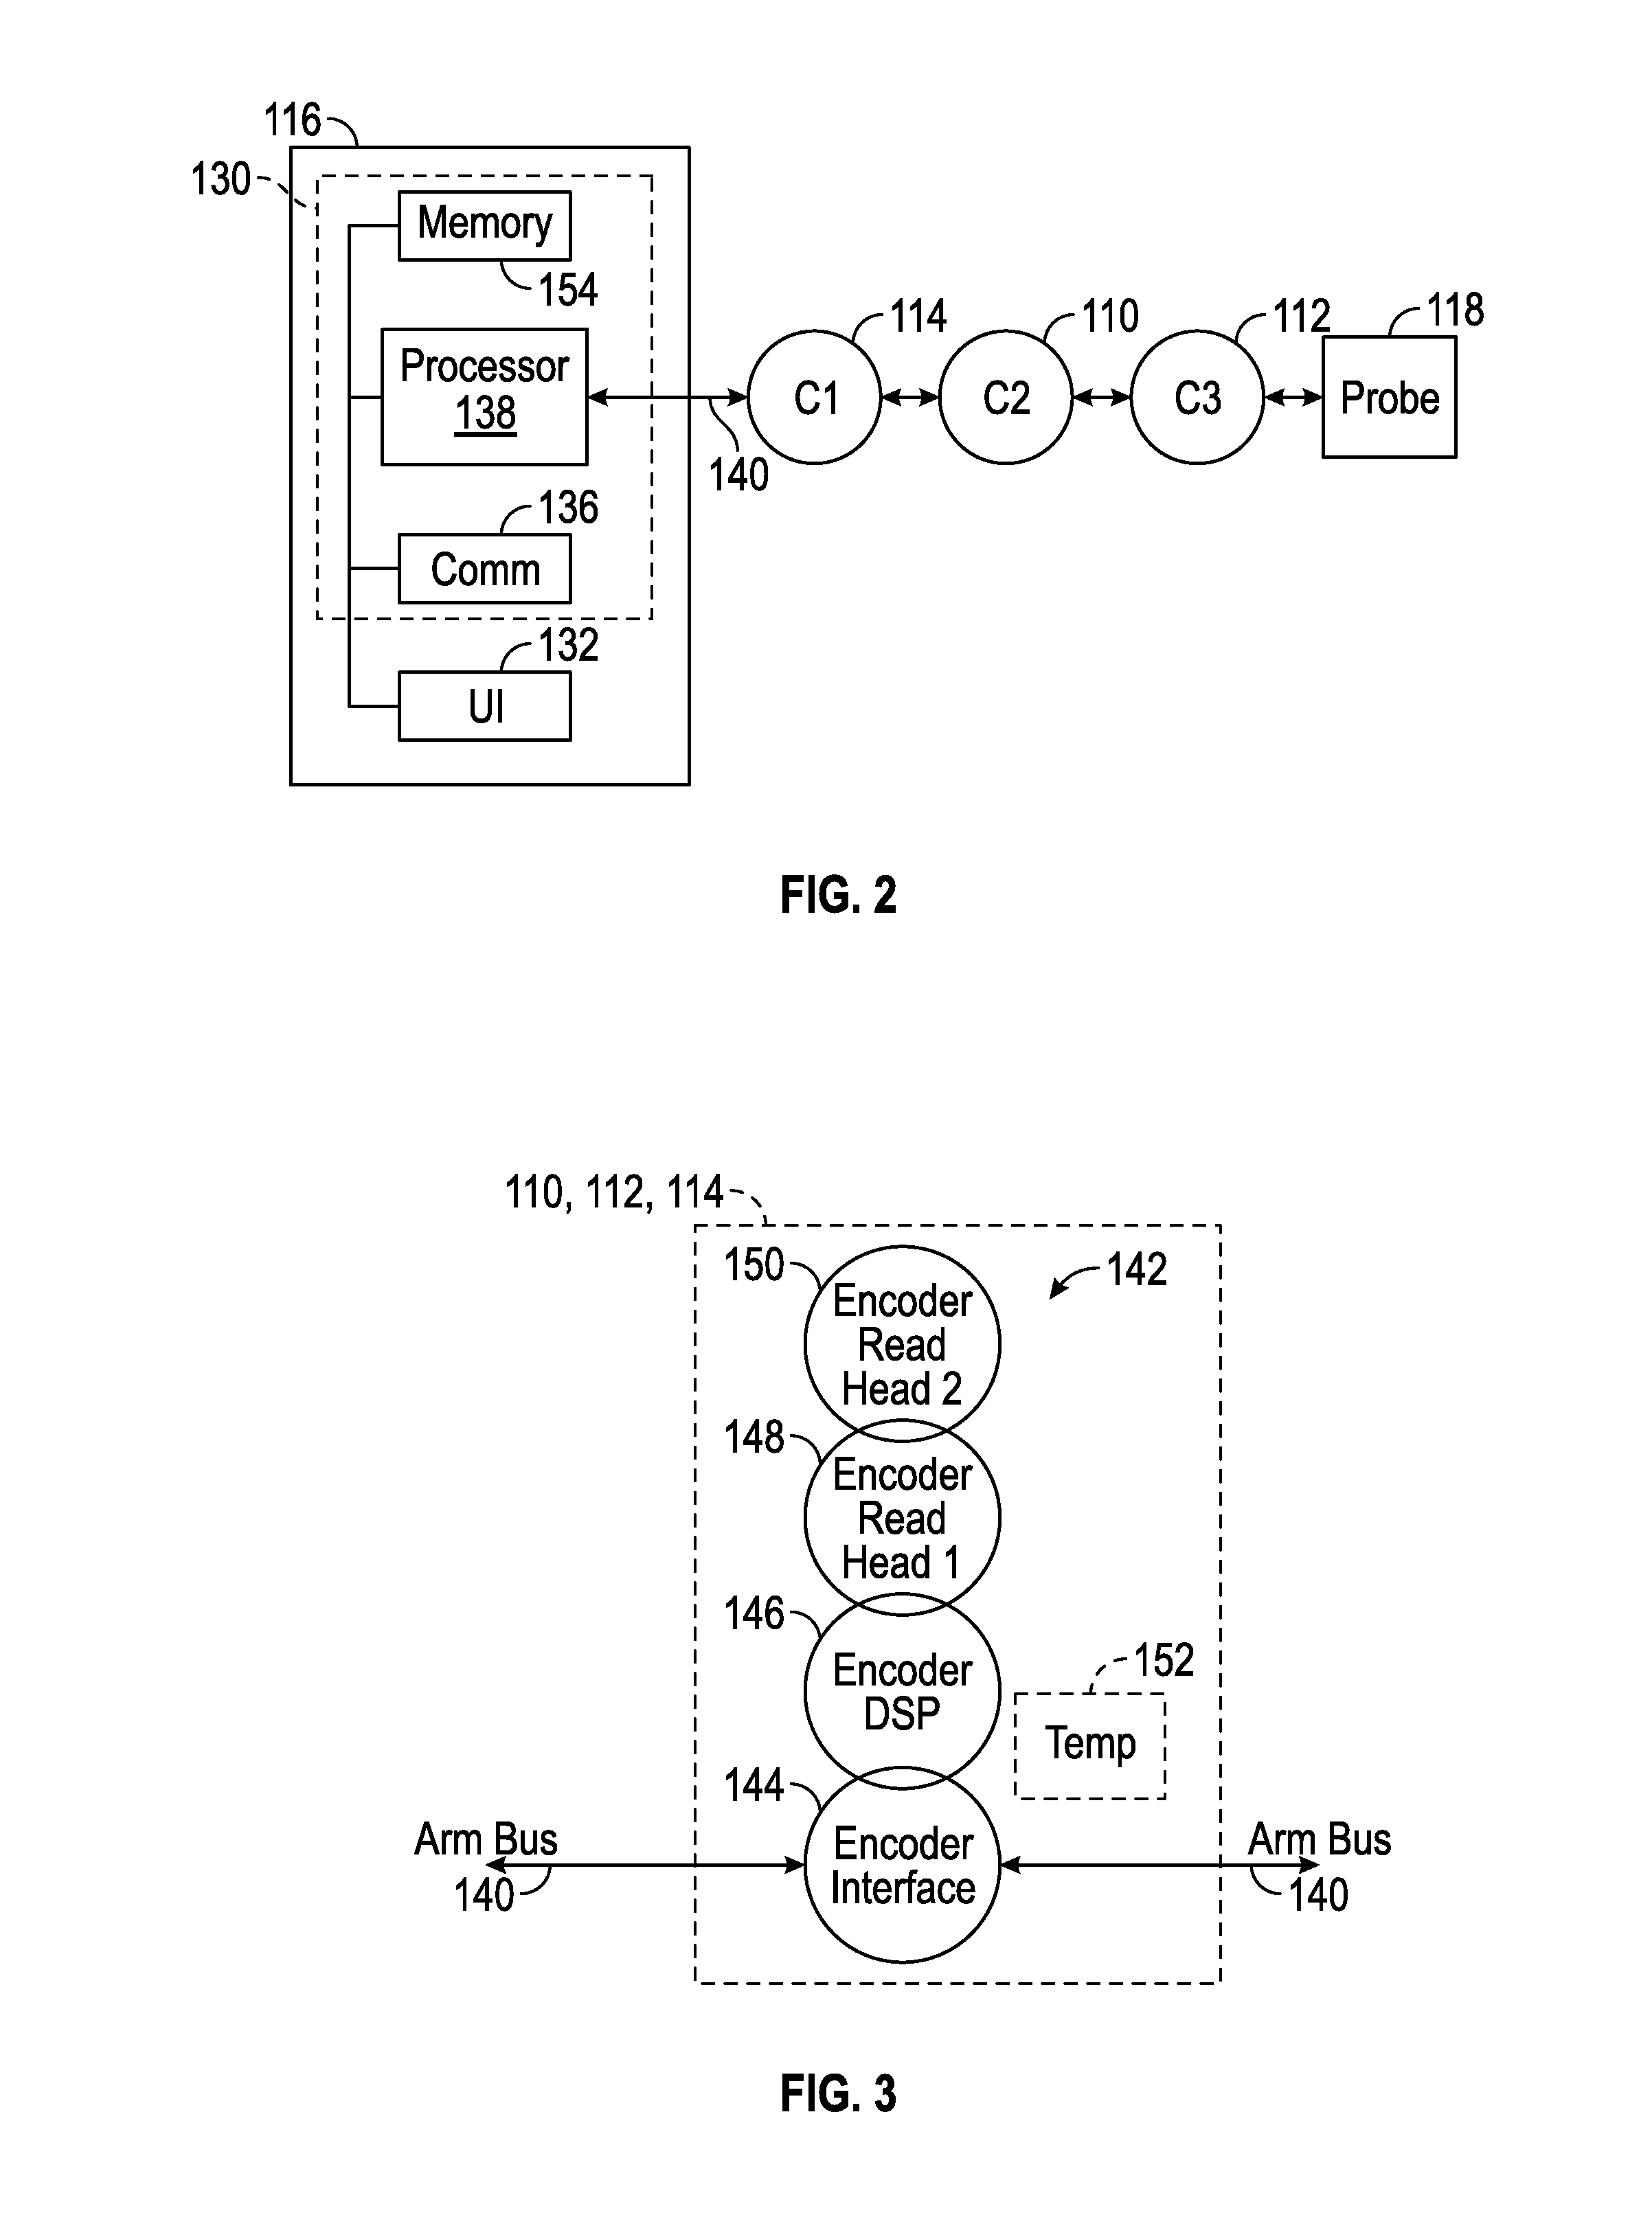 Metrology device and a method for compensating for bearing runout error